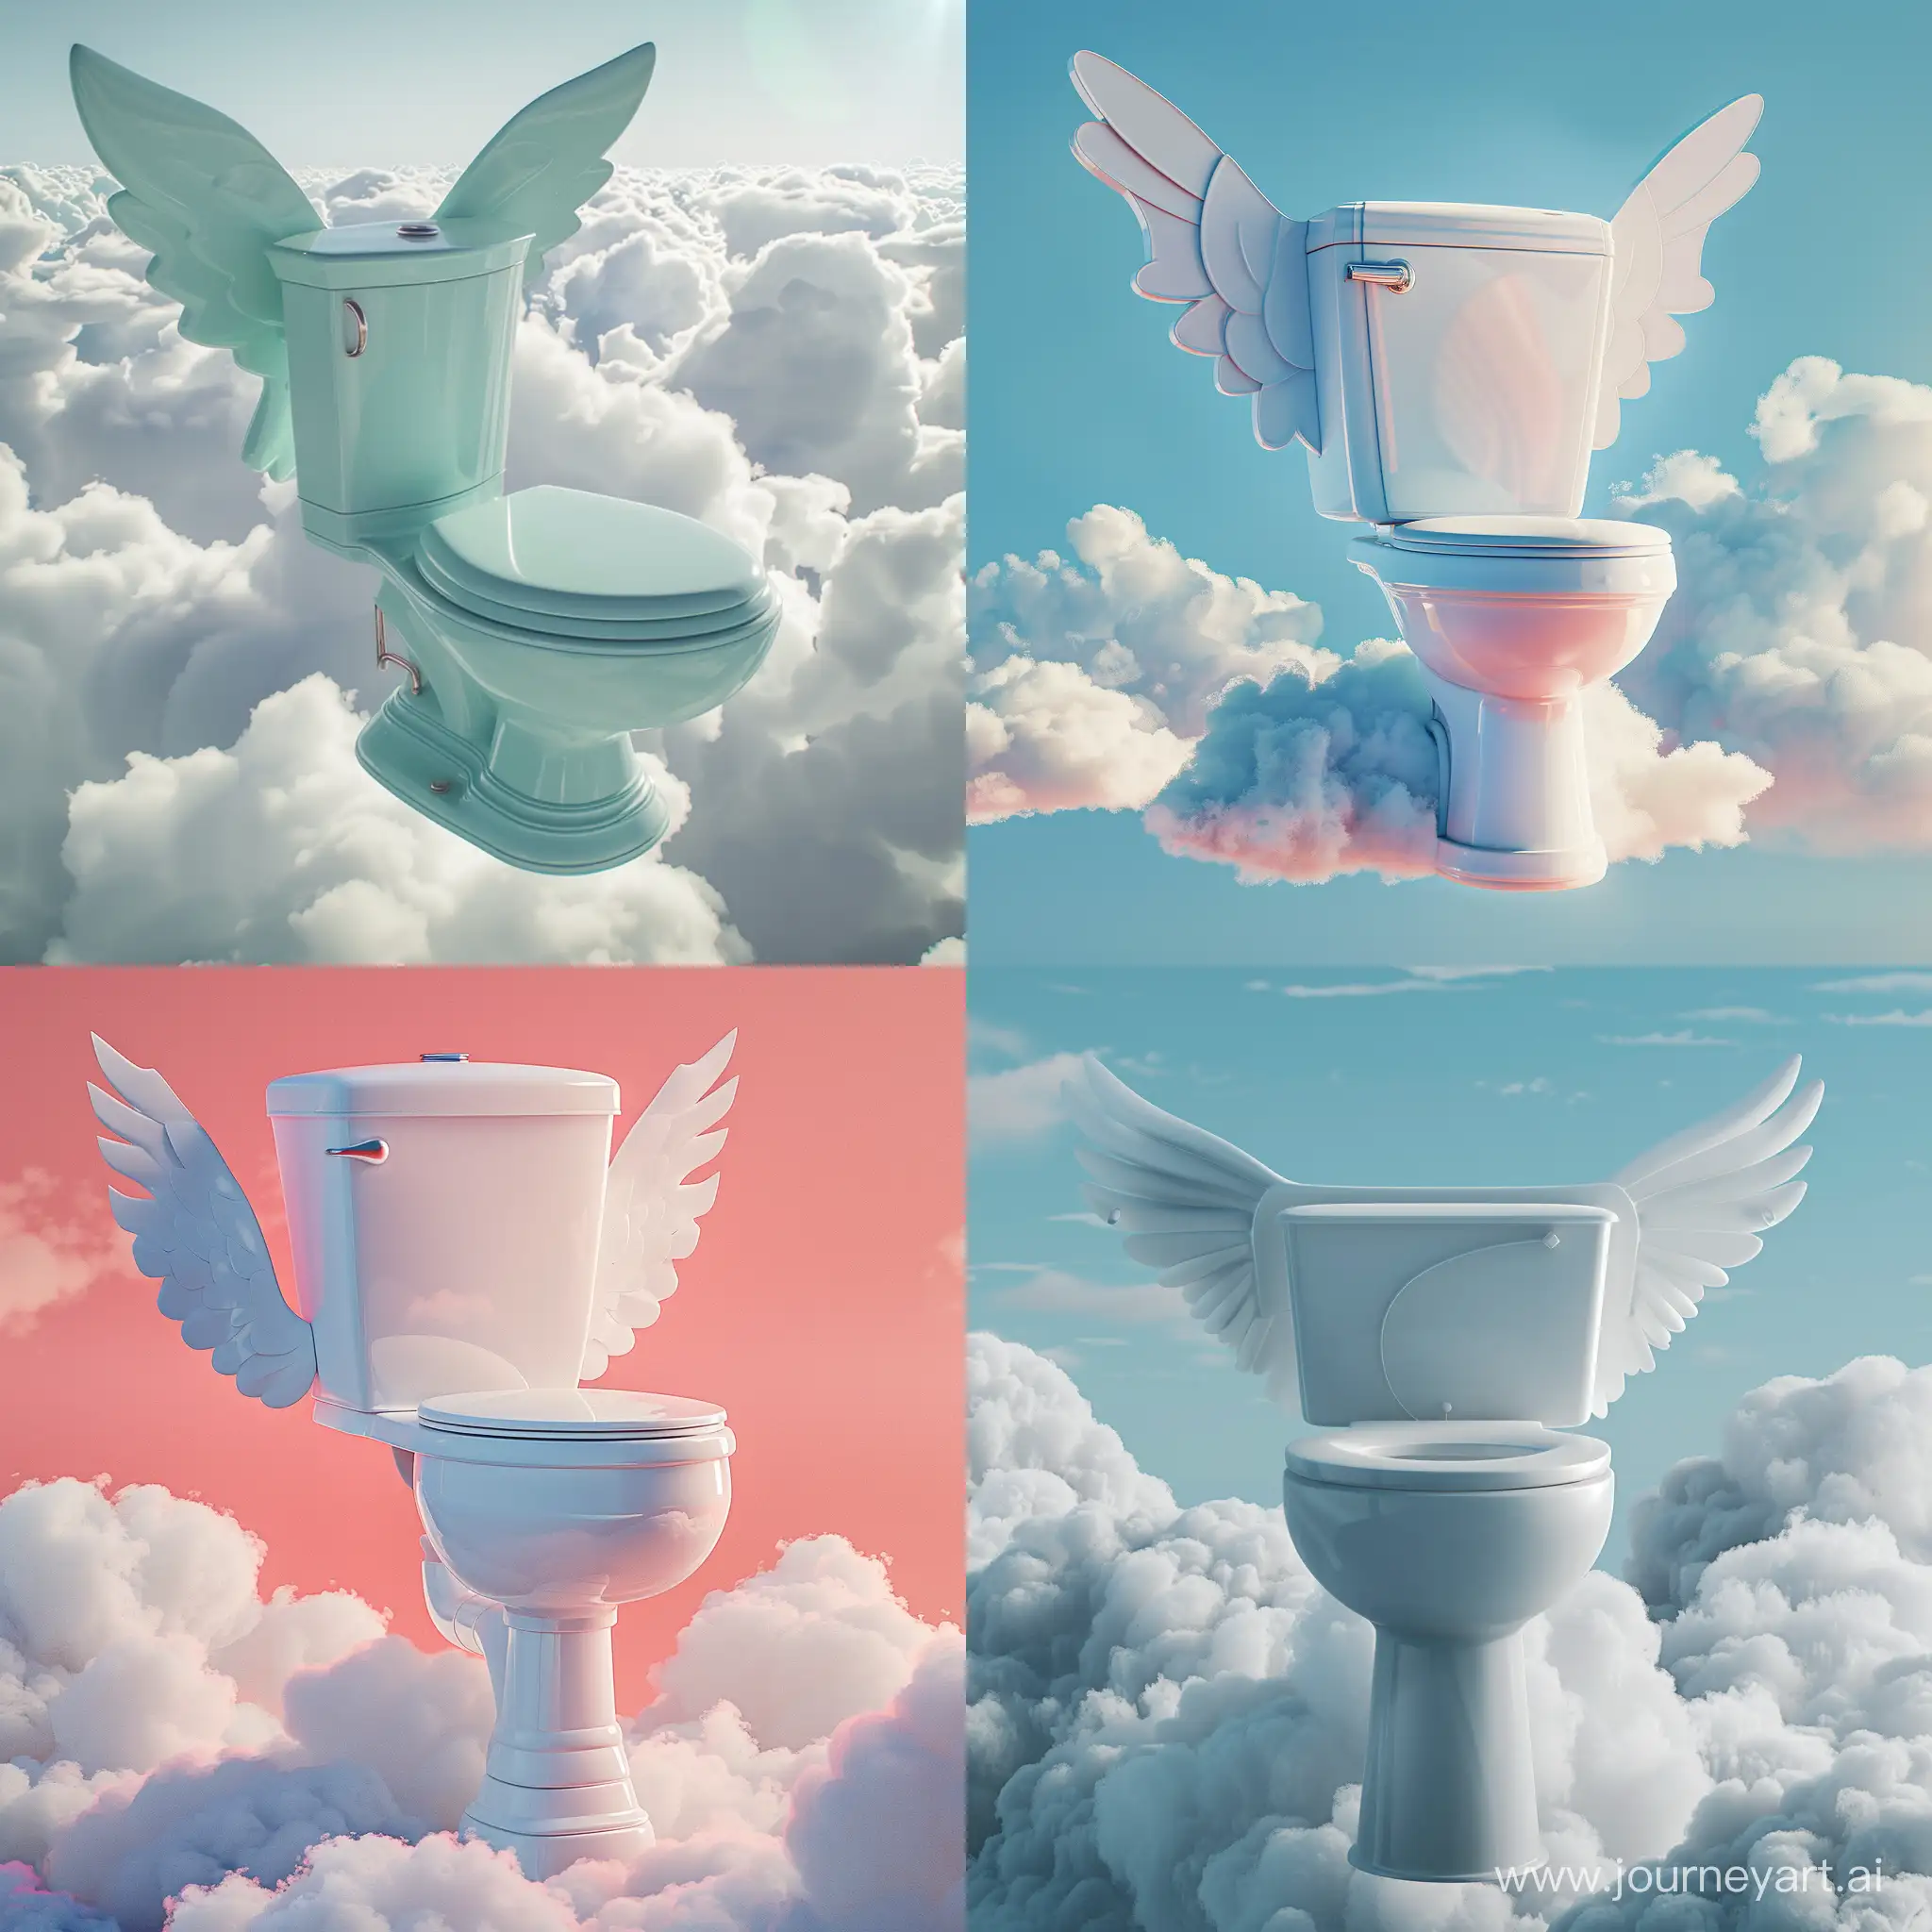 Very big toilet with wings fly at clouds